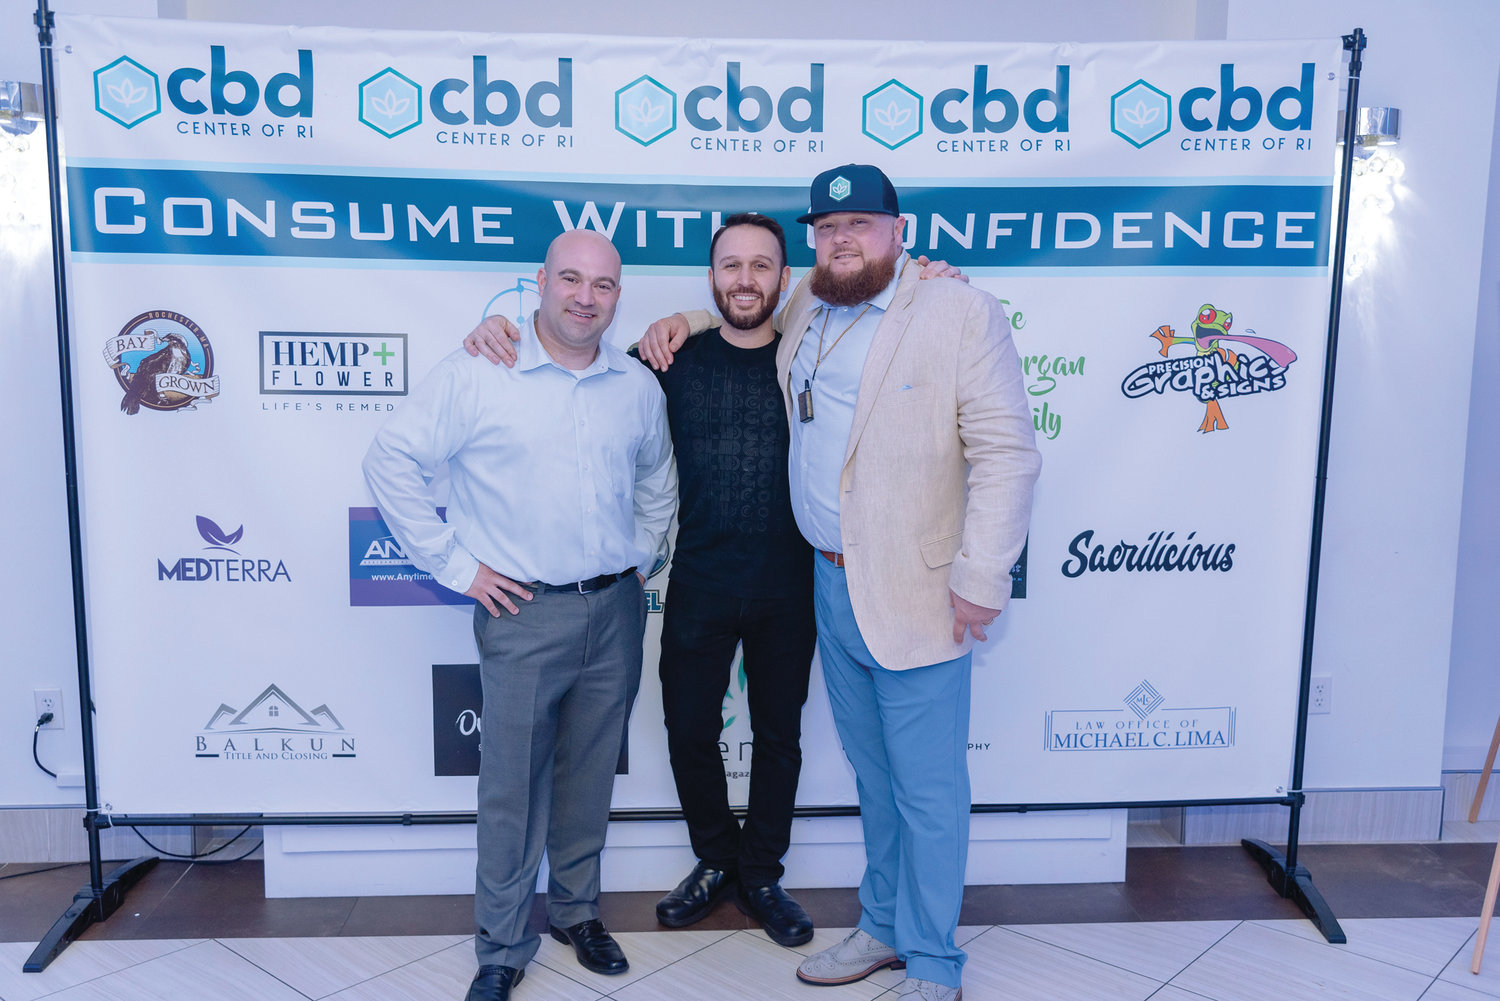 Owners Matt Resnick (l) and Chris Morgan (r) flank Chef David Yusefadeh of Sacrilicious at the CBD Center of RI’s launch party, “Consume with Confidence”, held on April 20th at Skyline at Waterplace. CBD Center is located at 1239 Hartford Avenue in Johnston.